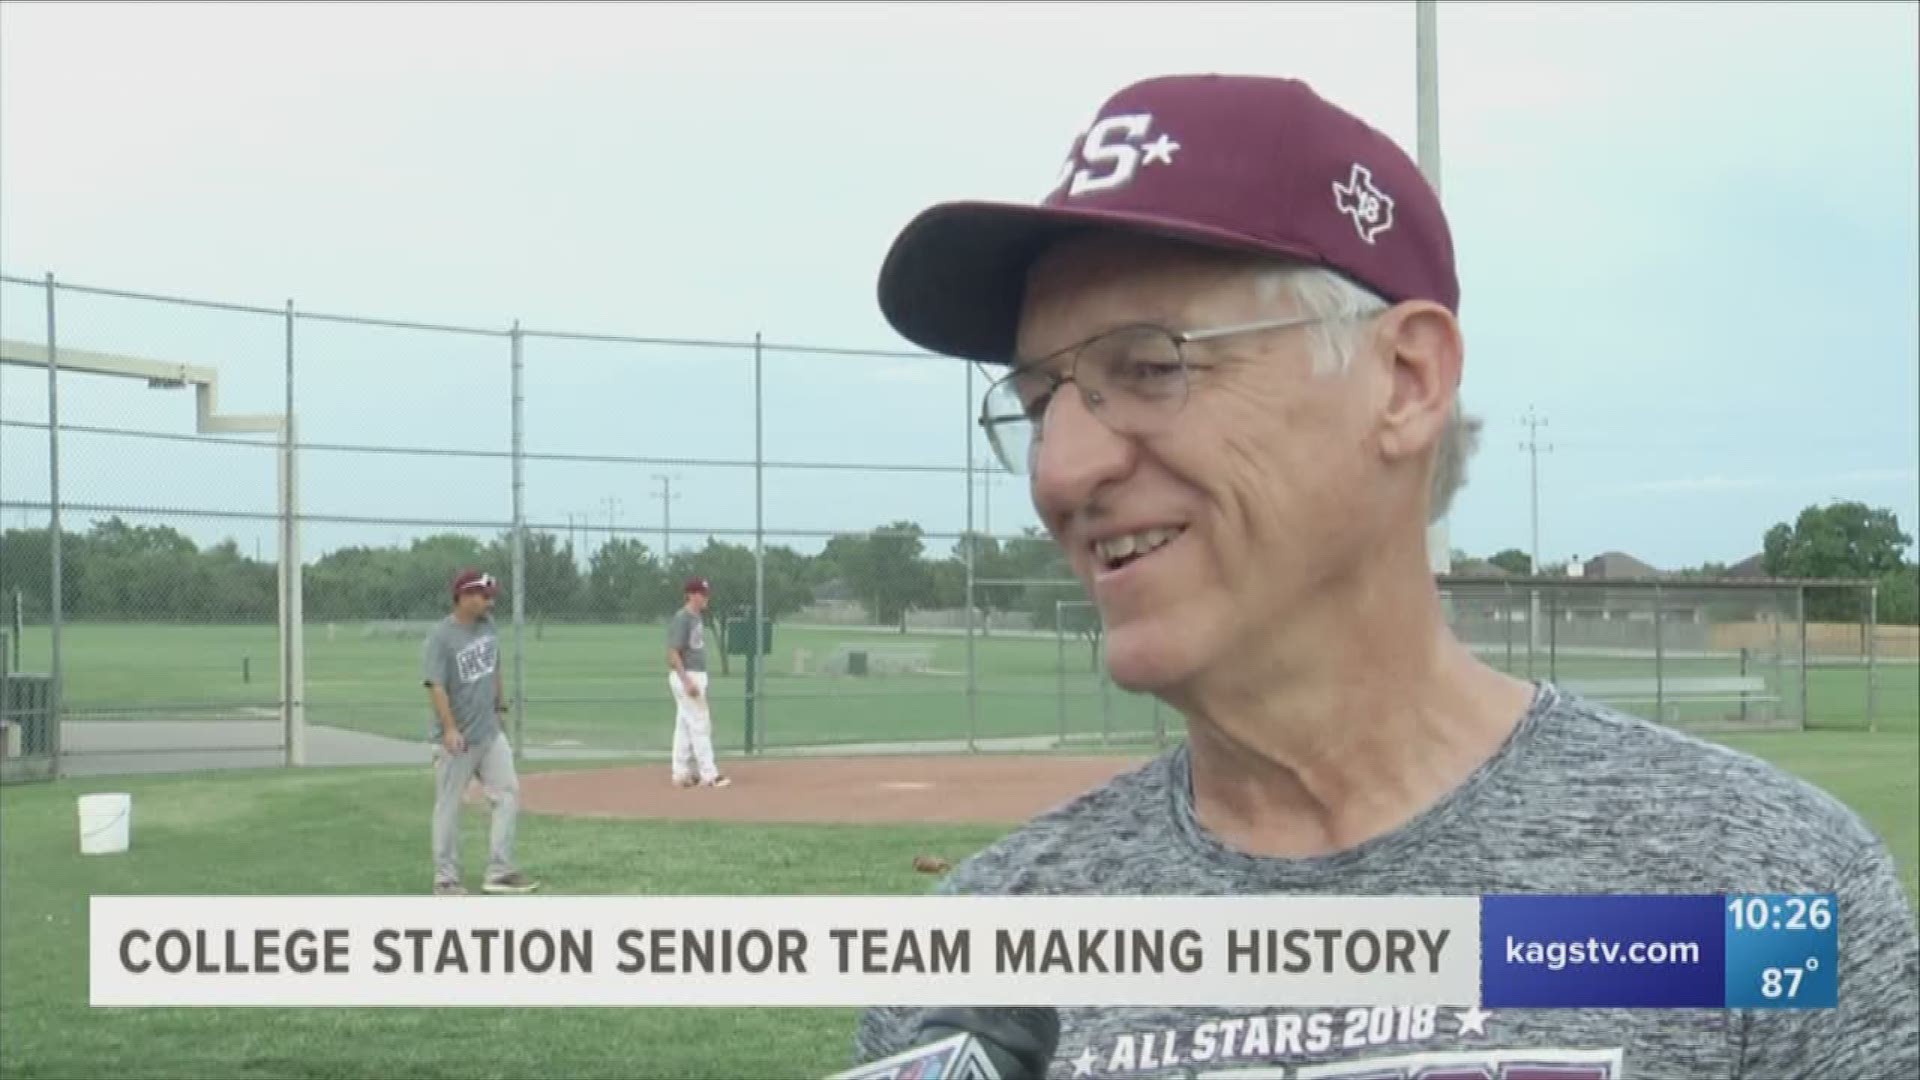 College Station is sending a Senior Little League team to the State tournament for the first time ever.